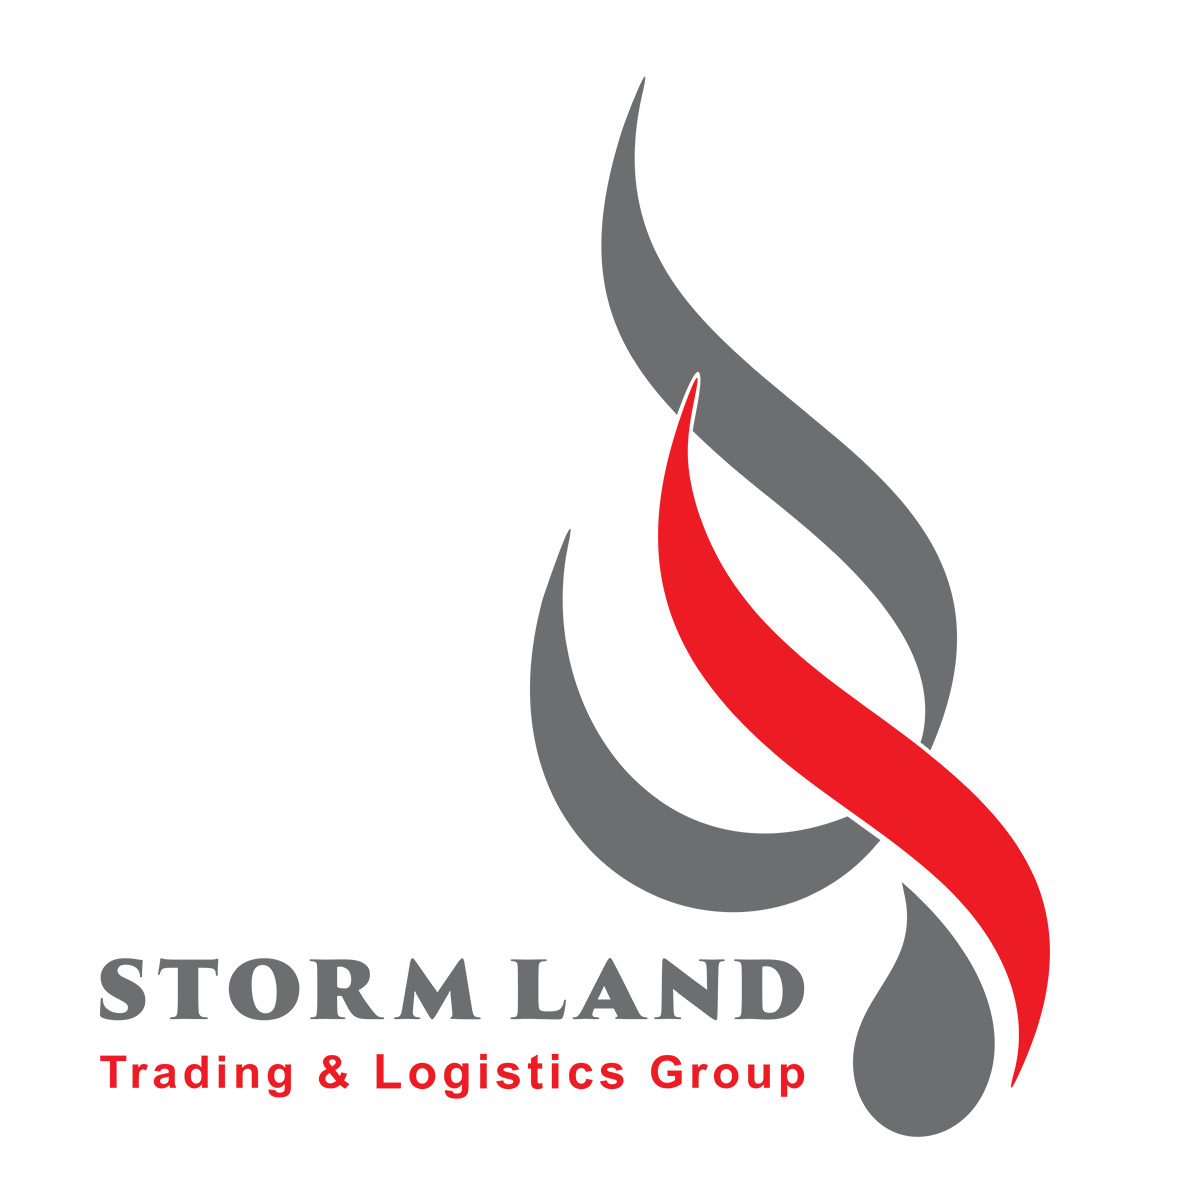 Storm Land Group